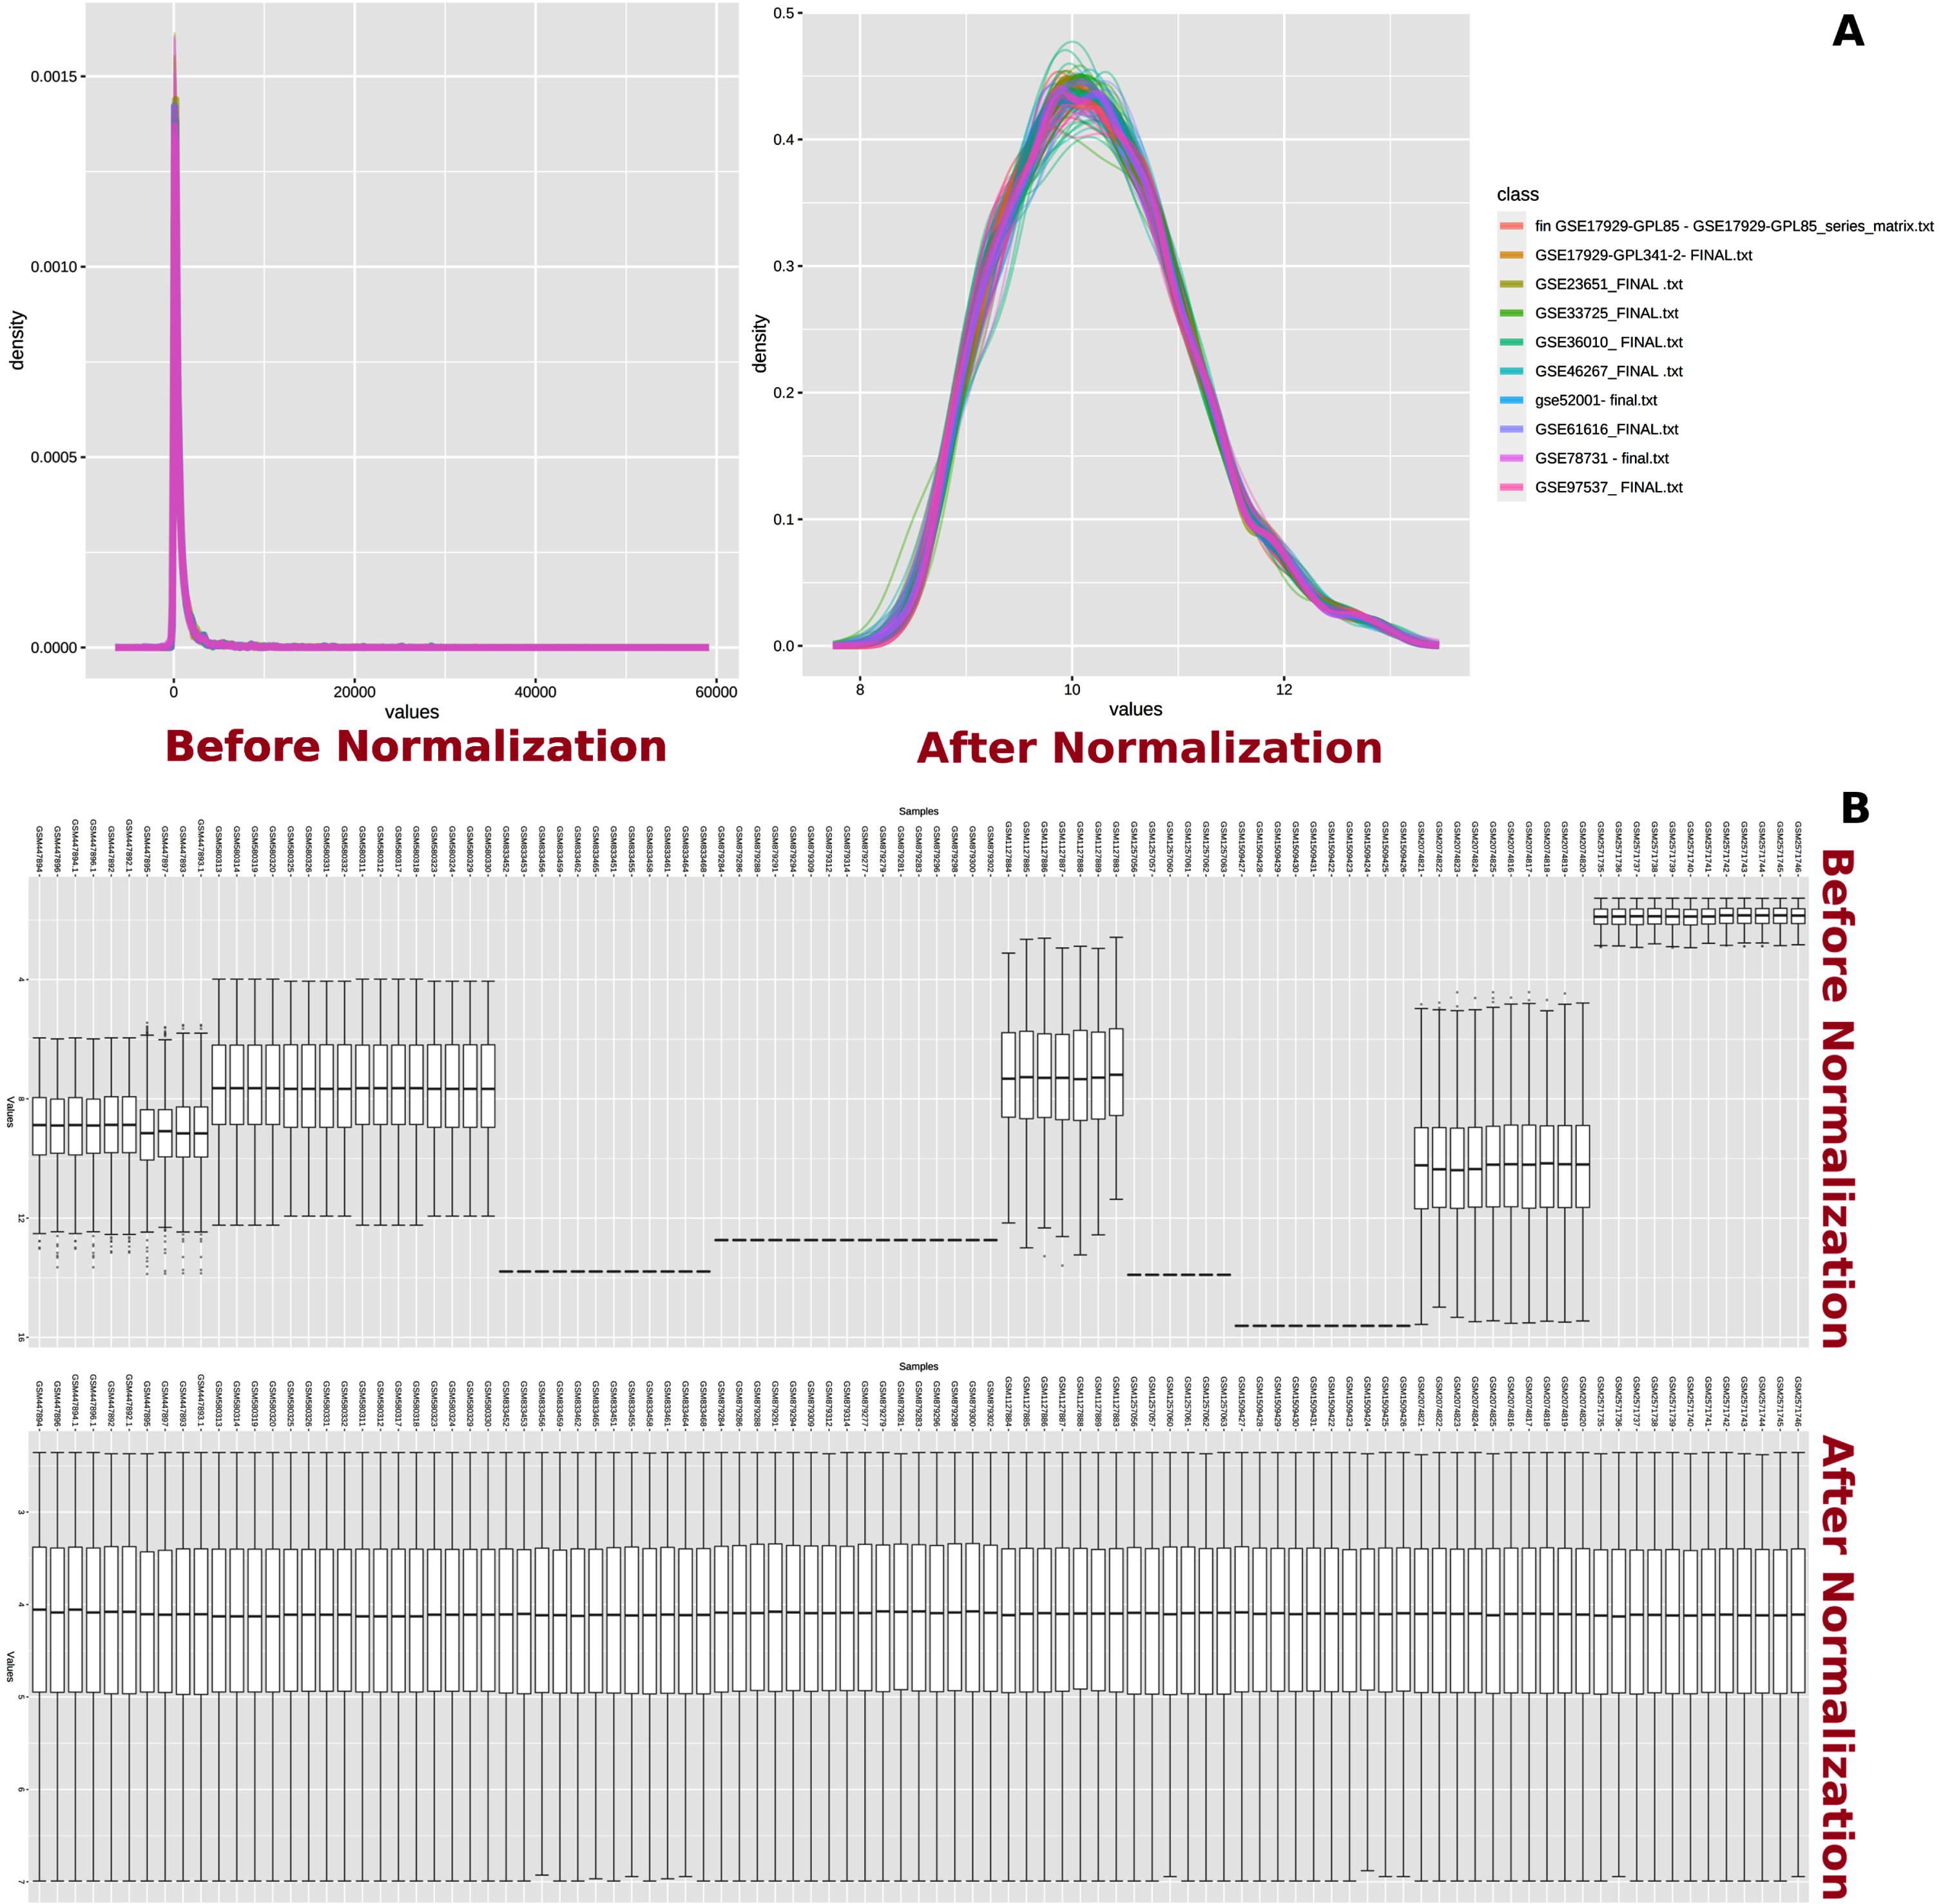 Normalization of datasets. Normalization of transcriptome data. A) Total intensity distribution among microarray datasets before and after normalization is shown. B) Variation in intensity values from each sample before and after normalization is shown.